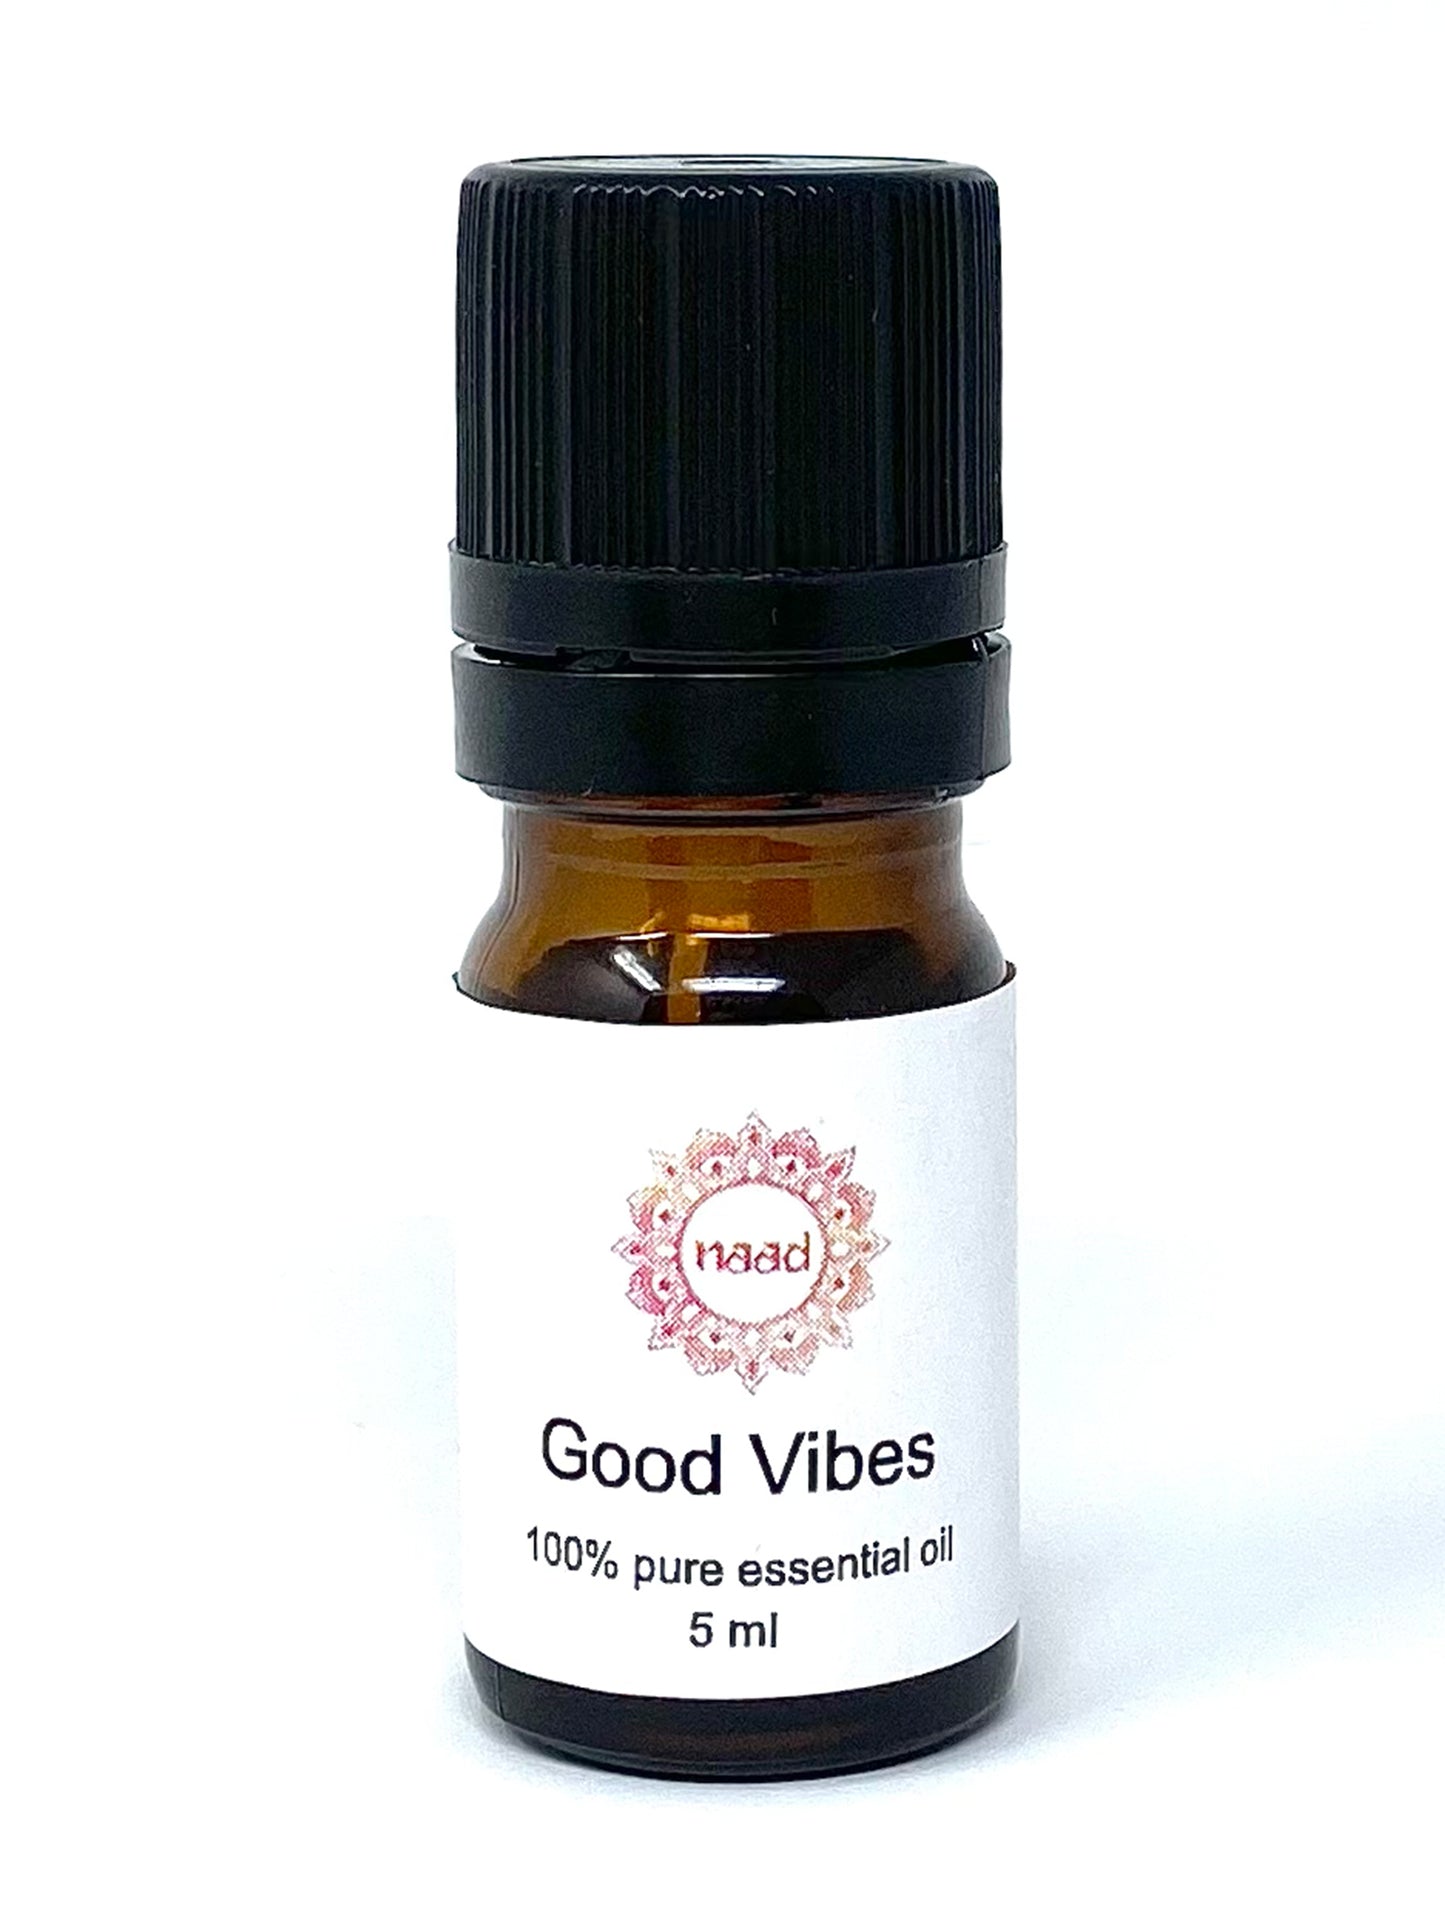 Good Vibes Diffusing Oil